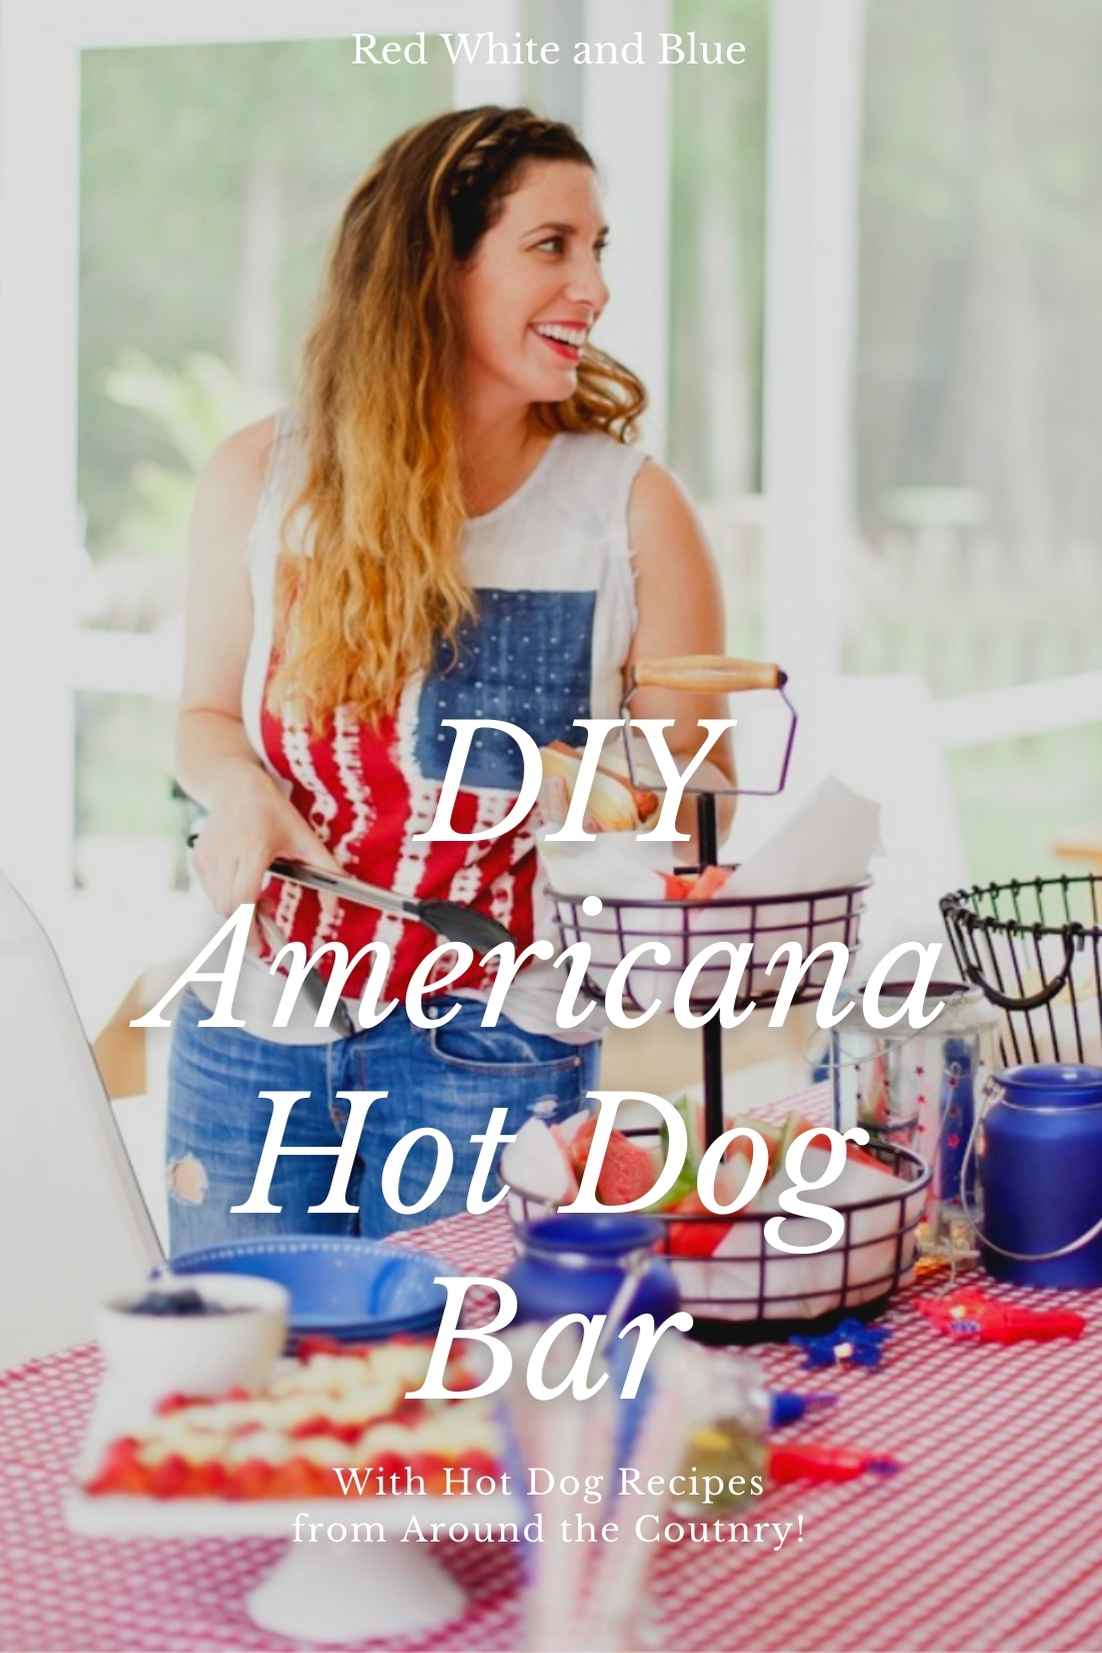 Red White and Blue fun, and a DIY Americana Hot Dog Bar! Set up toppings and flavors for hot dog recipes from around the U.S. Chicago style, Boston, Detroit, Philly, Carolina hot dog and more! |  Hot Dog Bar by popular Florida lifestyle blog, Fresh Mommy Blog: Pinterest image of a woman wearing an American flag tank top and assembling a hot dog at a table with a red and white check table cloth, tiered black wire serving dish with watermelon slices, white serving plate of hot dogs, and American flag fruit platter. 